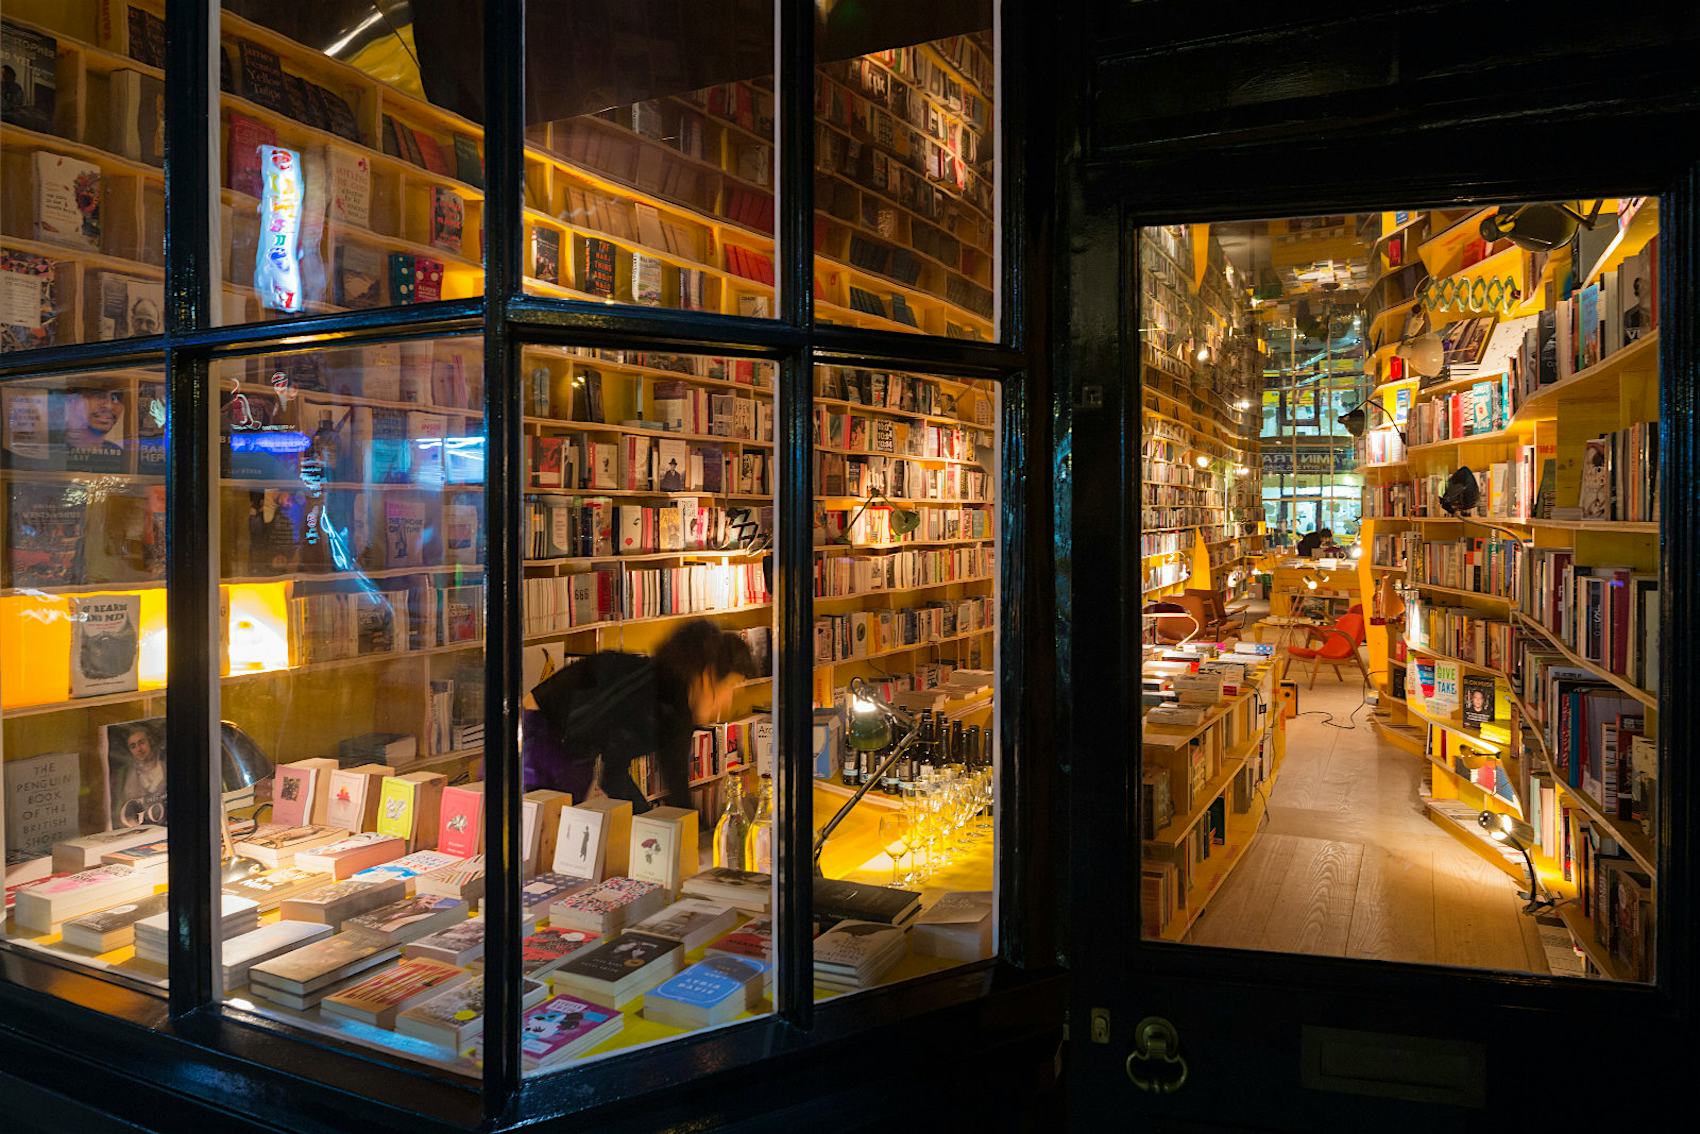 Outside window of The lights of Libreria Bookshop where a person looks at books